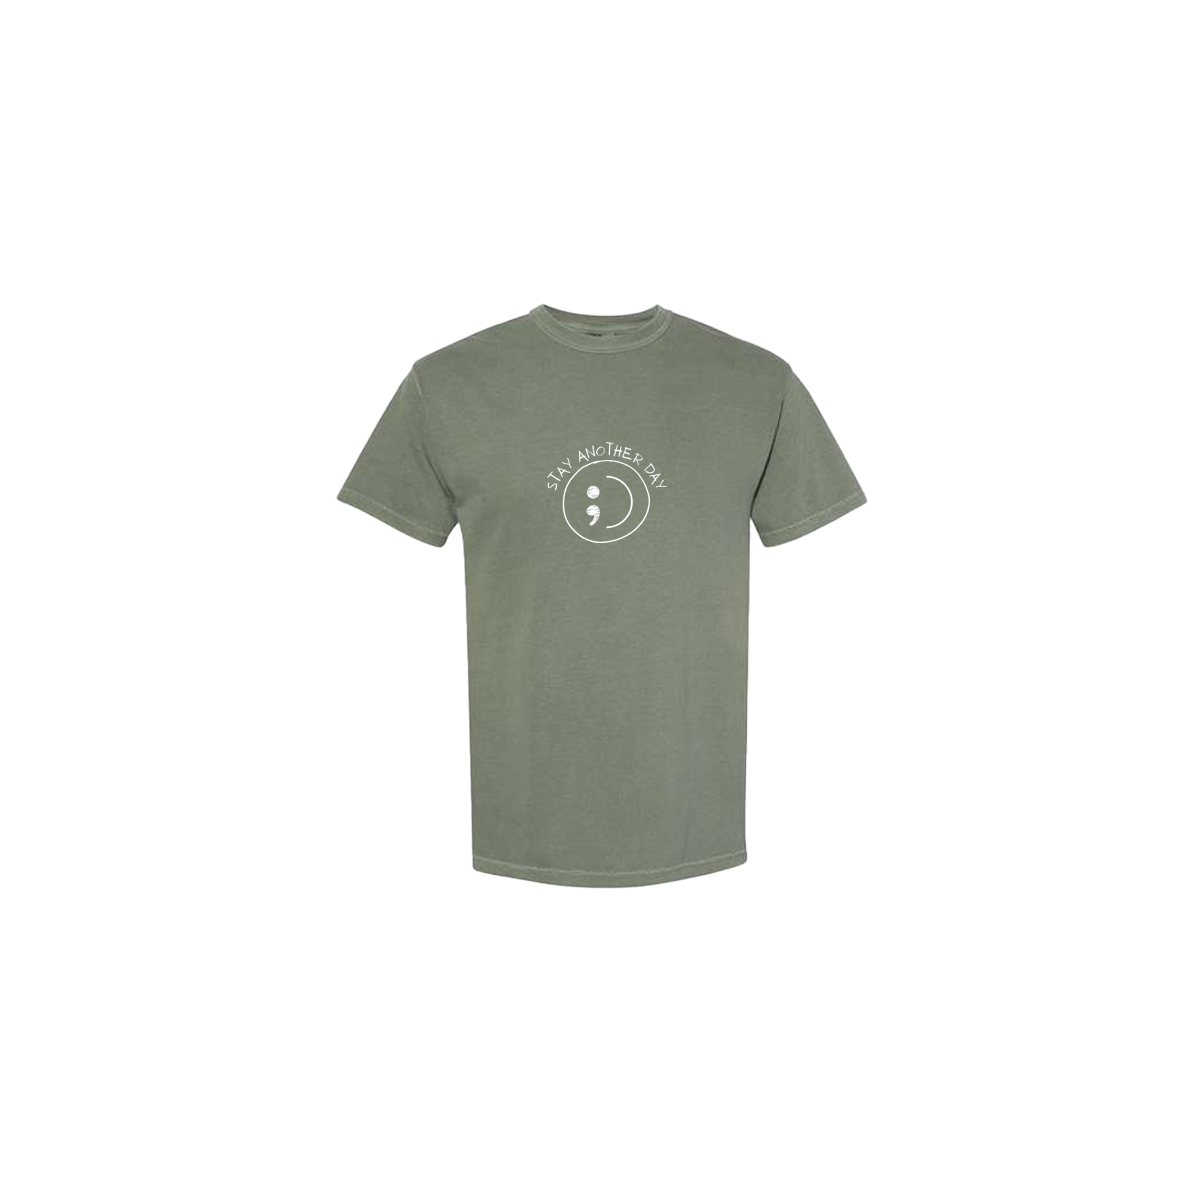 Stay Another Day Smiley Face Embroidered Army Green Tshirt - Mental Health Awareness Clothing